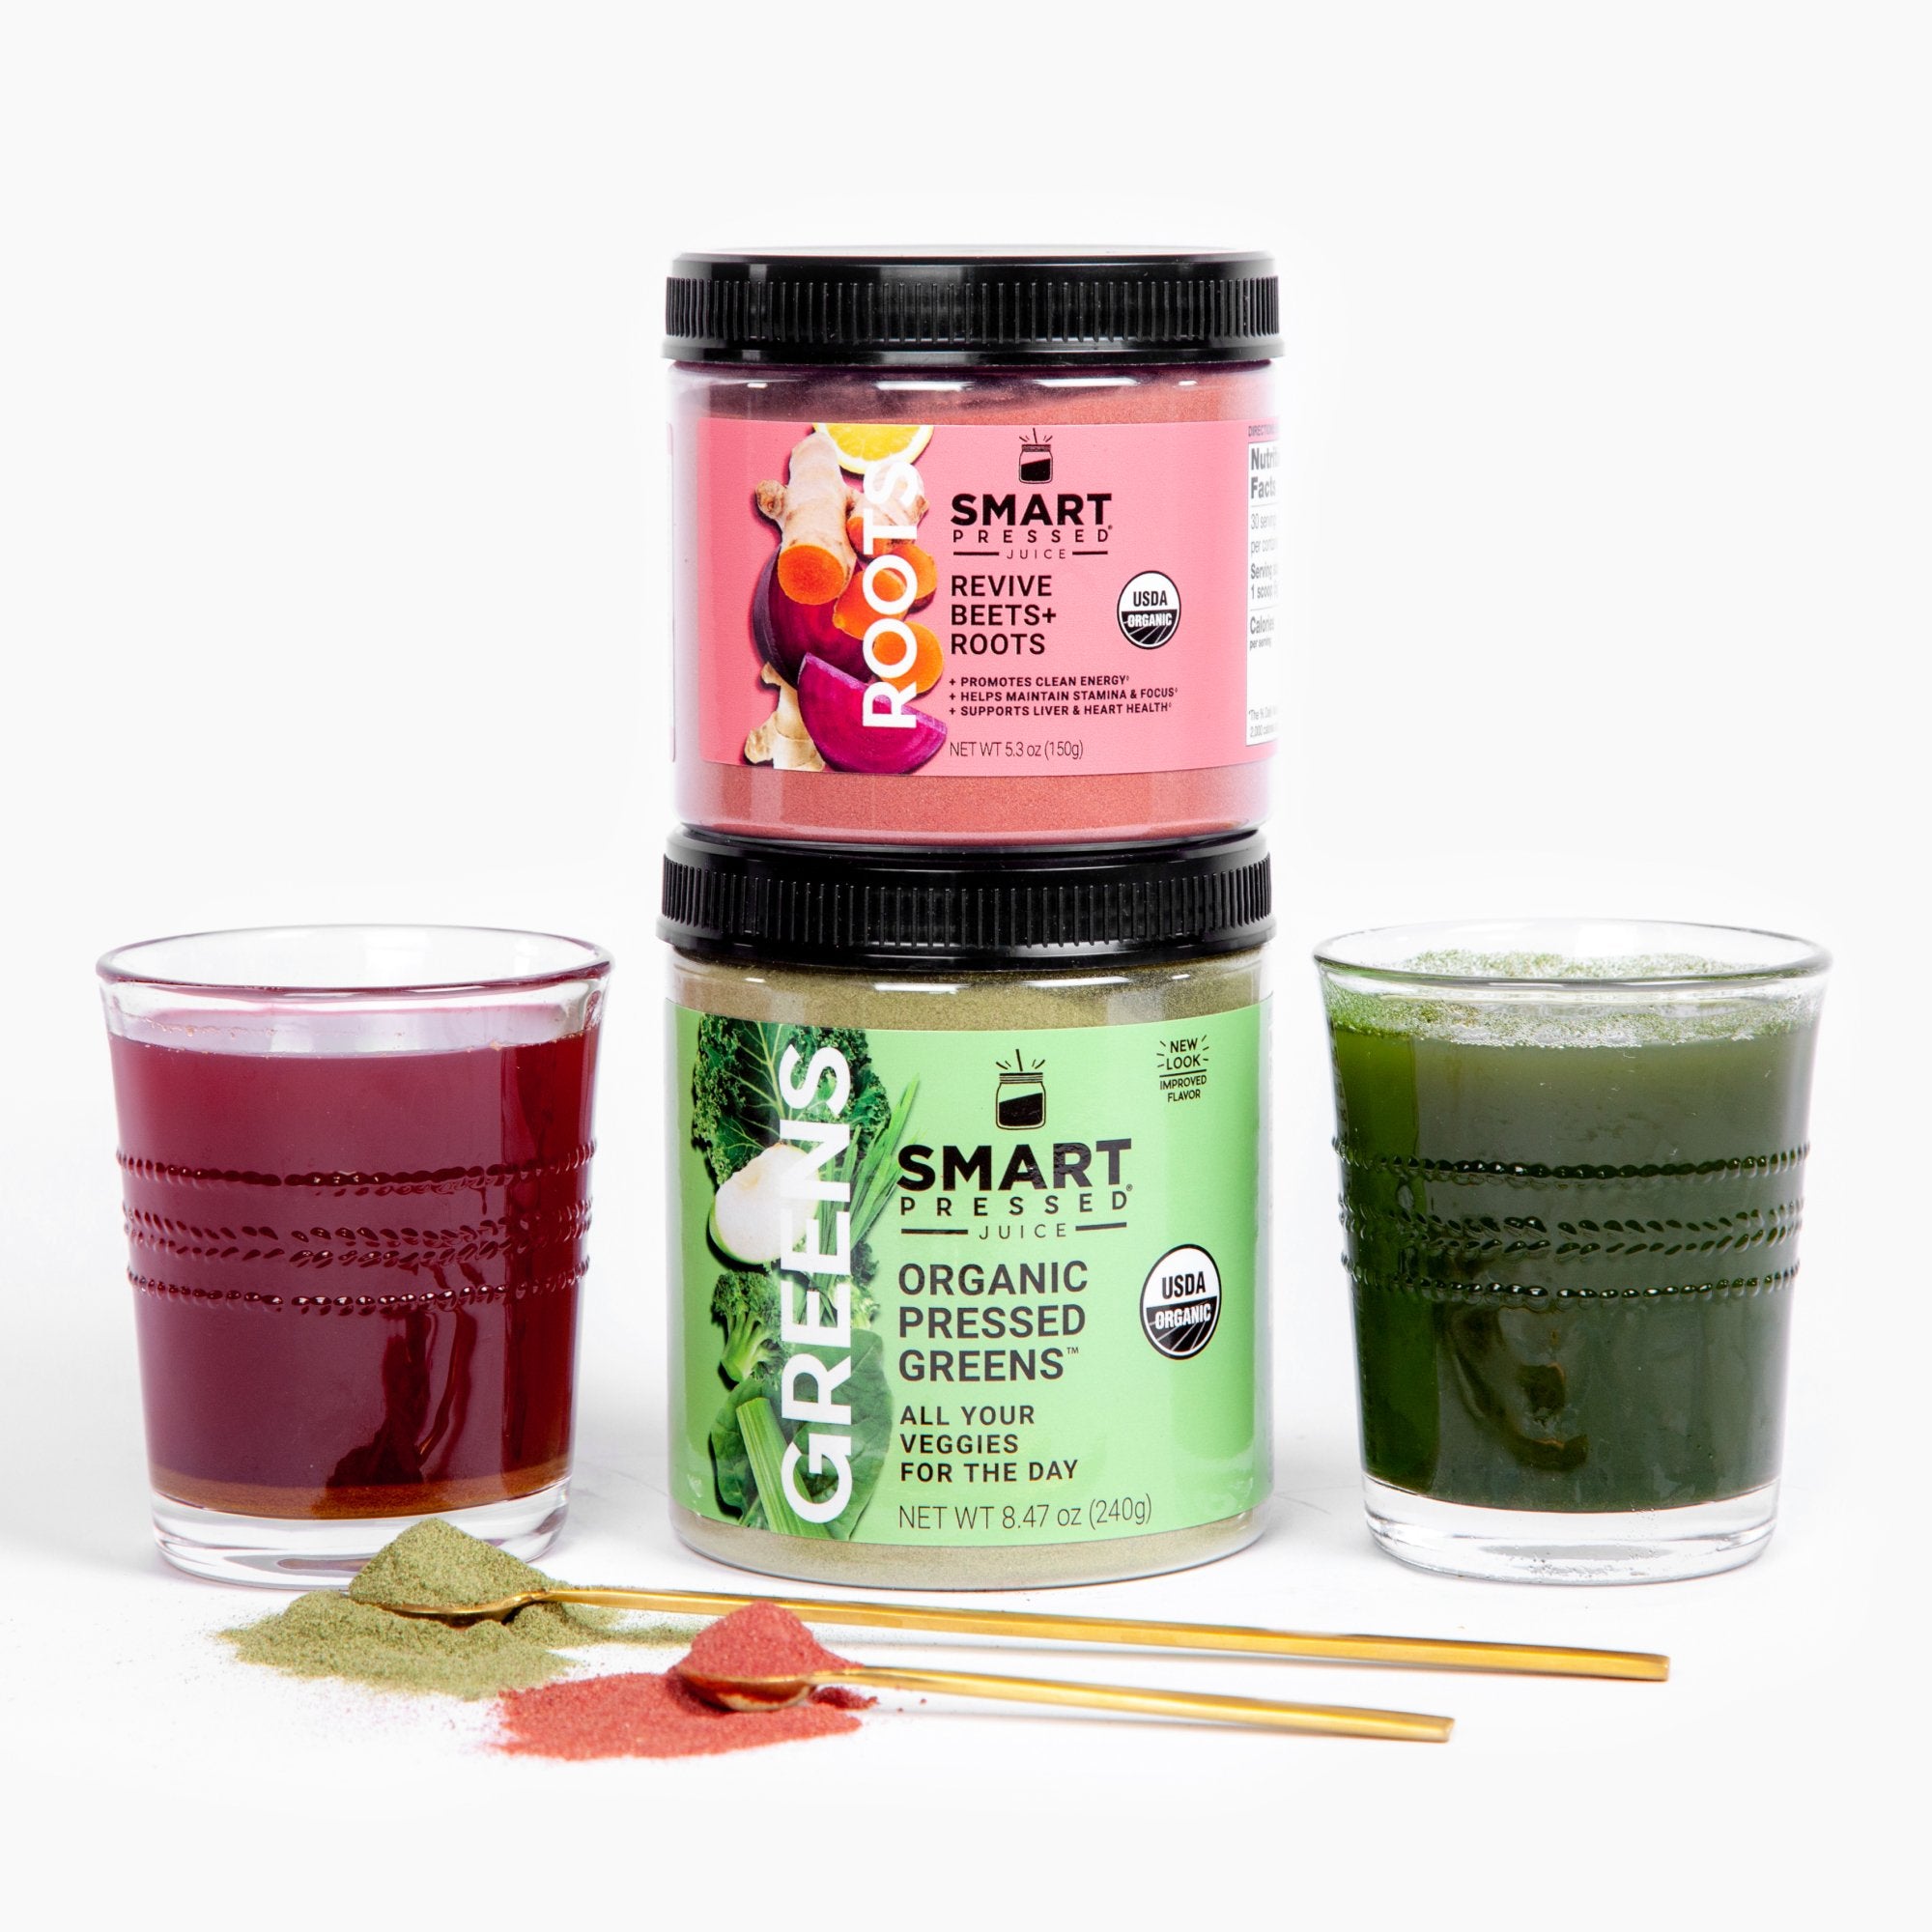 Image of a glass with a purple juice beside a jar of Revive Beet+Roots stacked in a jar of Organic Pressed Greens, and beside is a glass with a green juice. In front is 2 stirring spoons full of green and dark pink powder. Set against a white background.